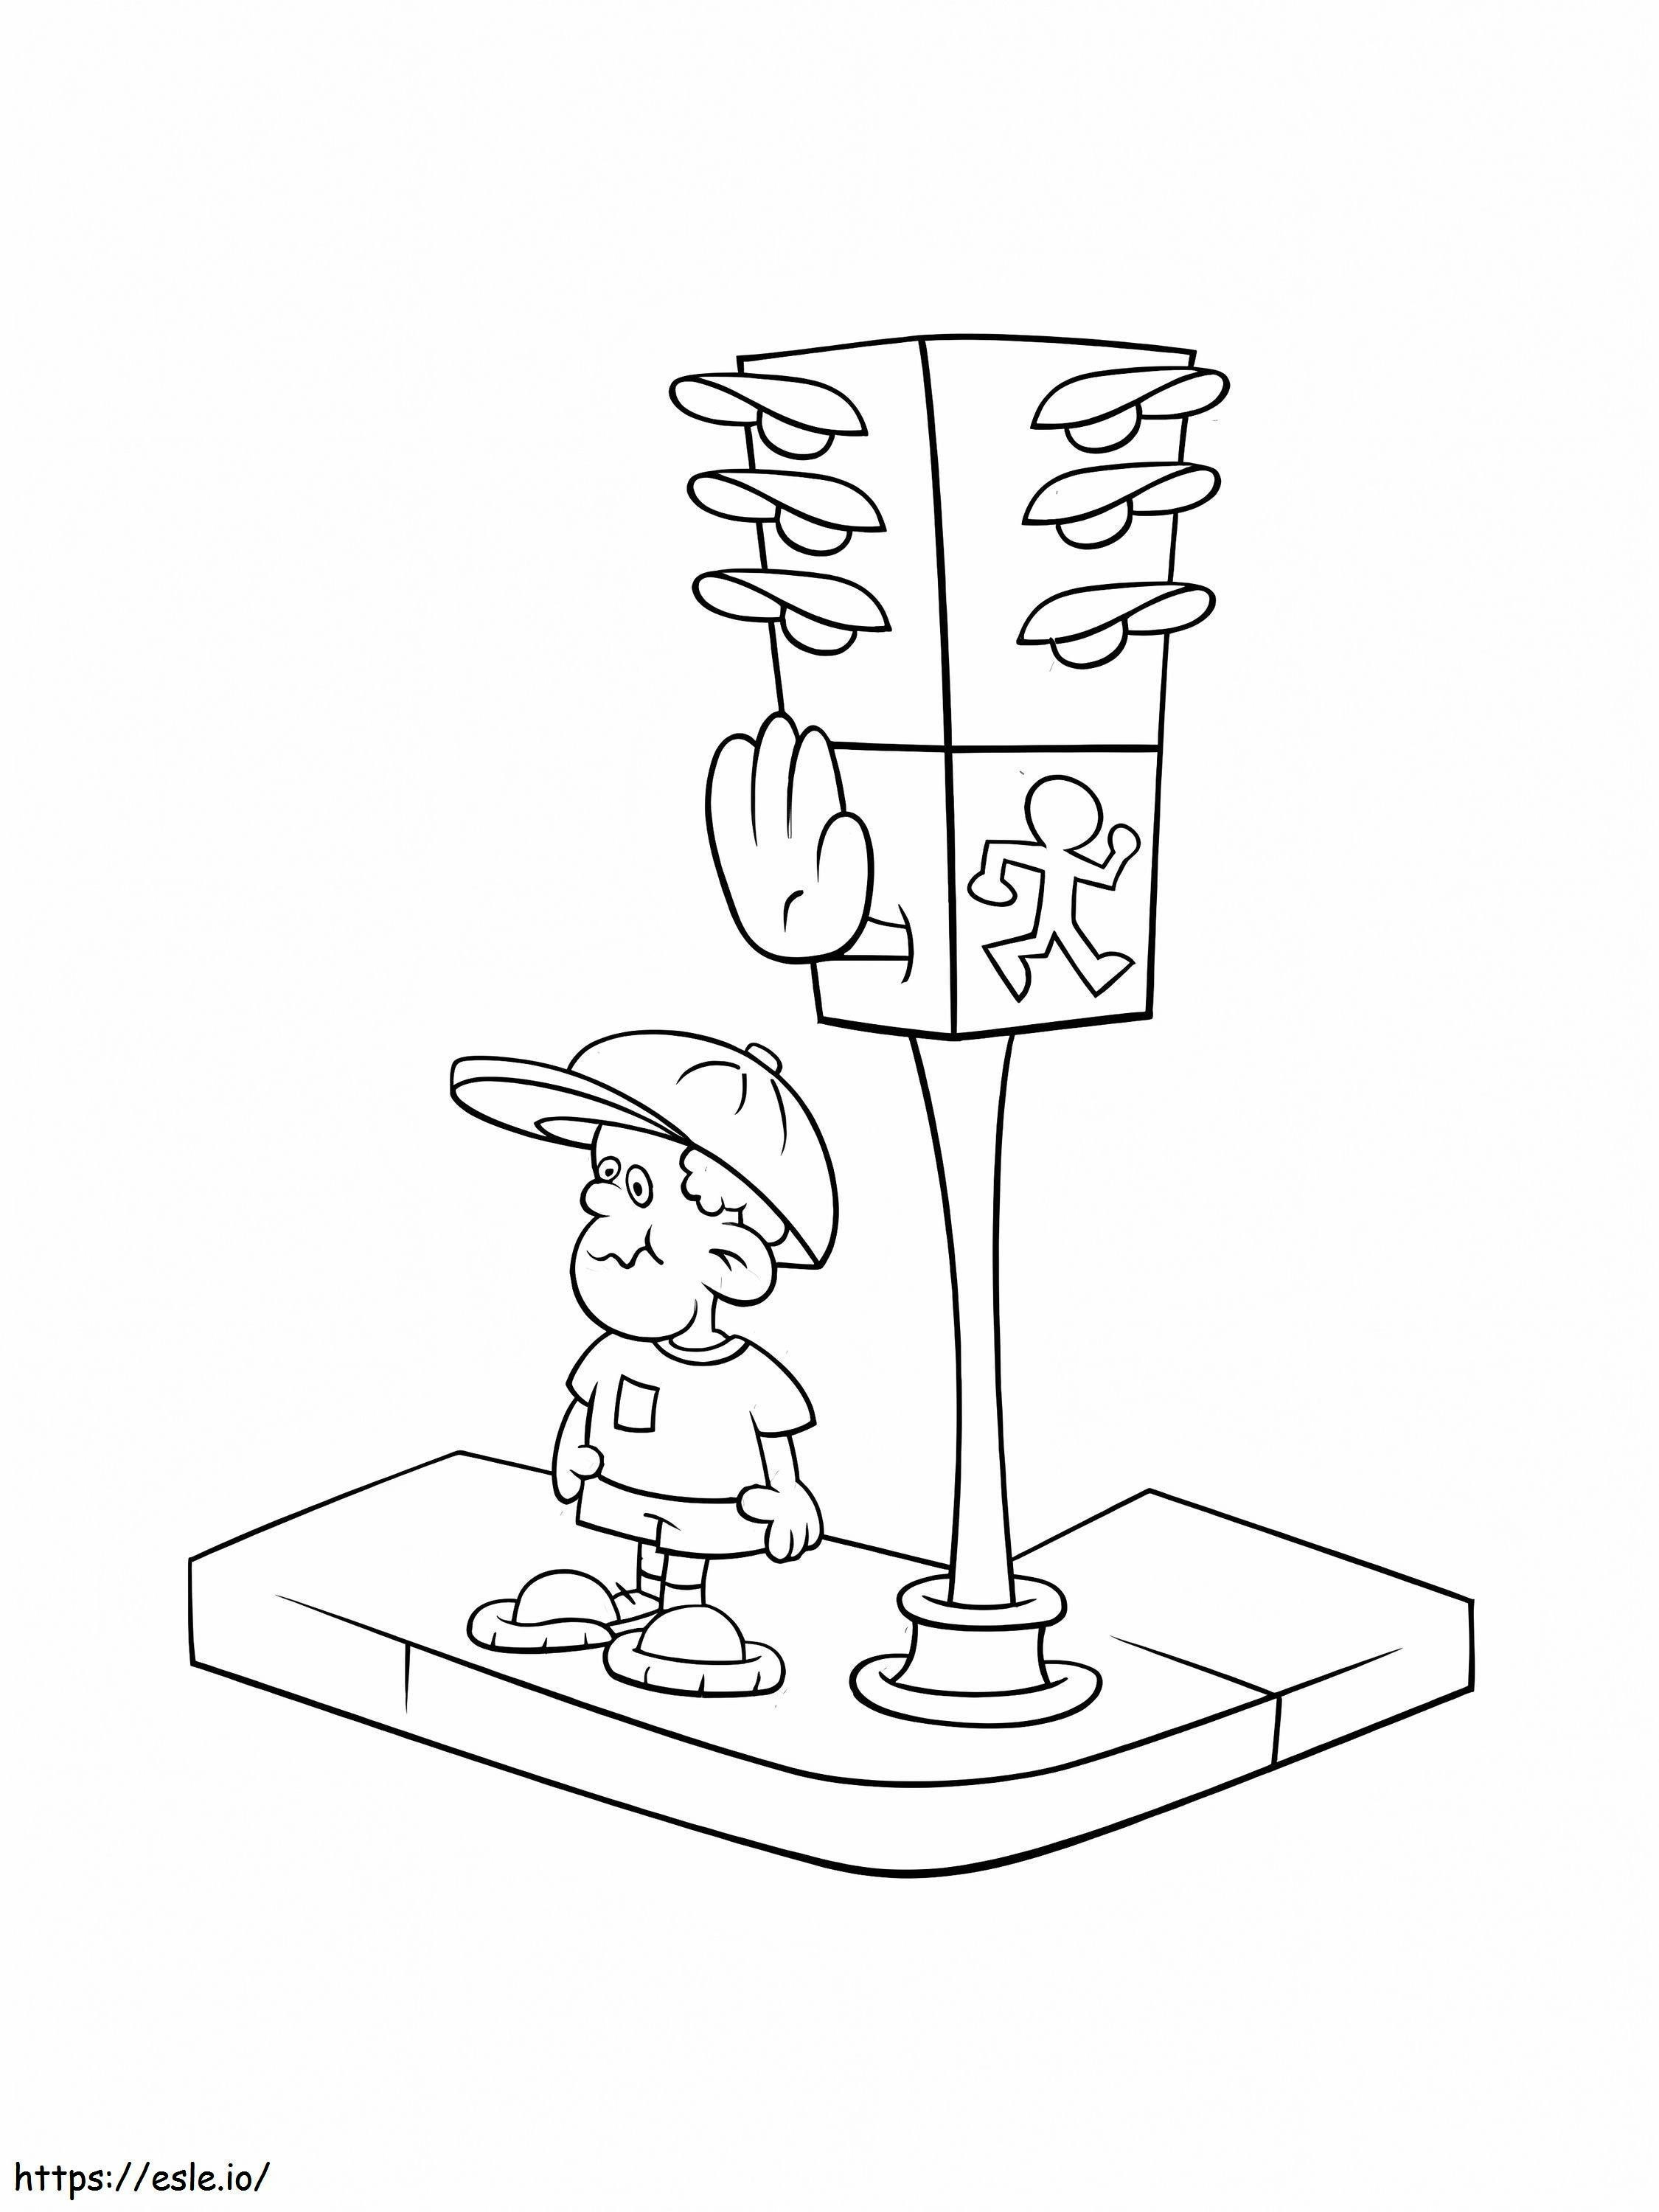 Little Boy And Traffic Light coloring page